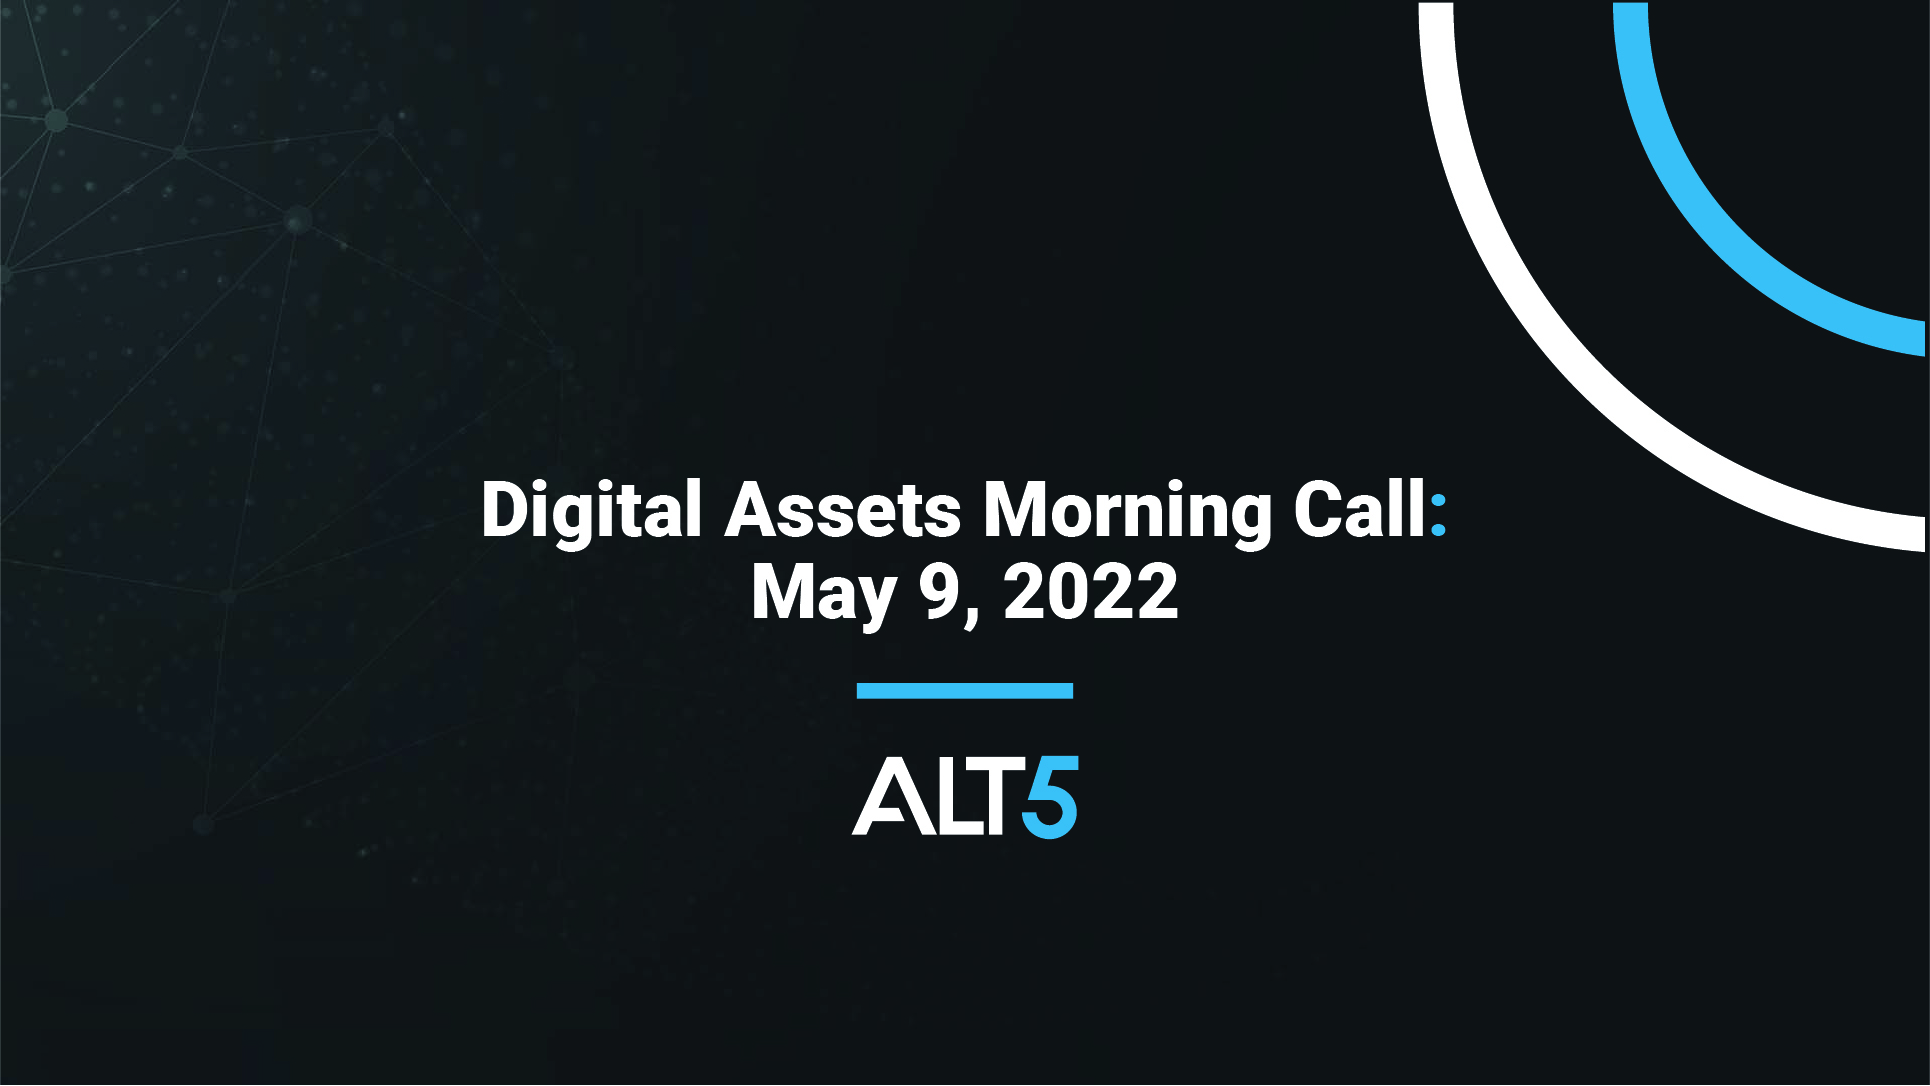 Digital Assets Morning Call: May 9 2022 - Technical breaks and uncertain macro keep pressure on major crypto assets